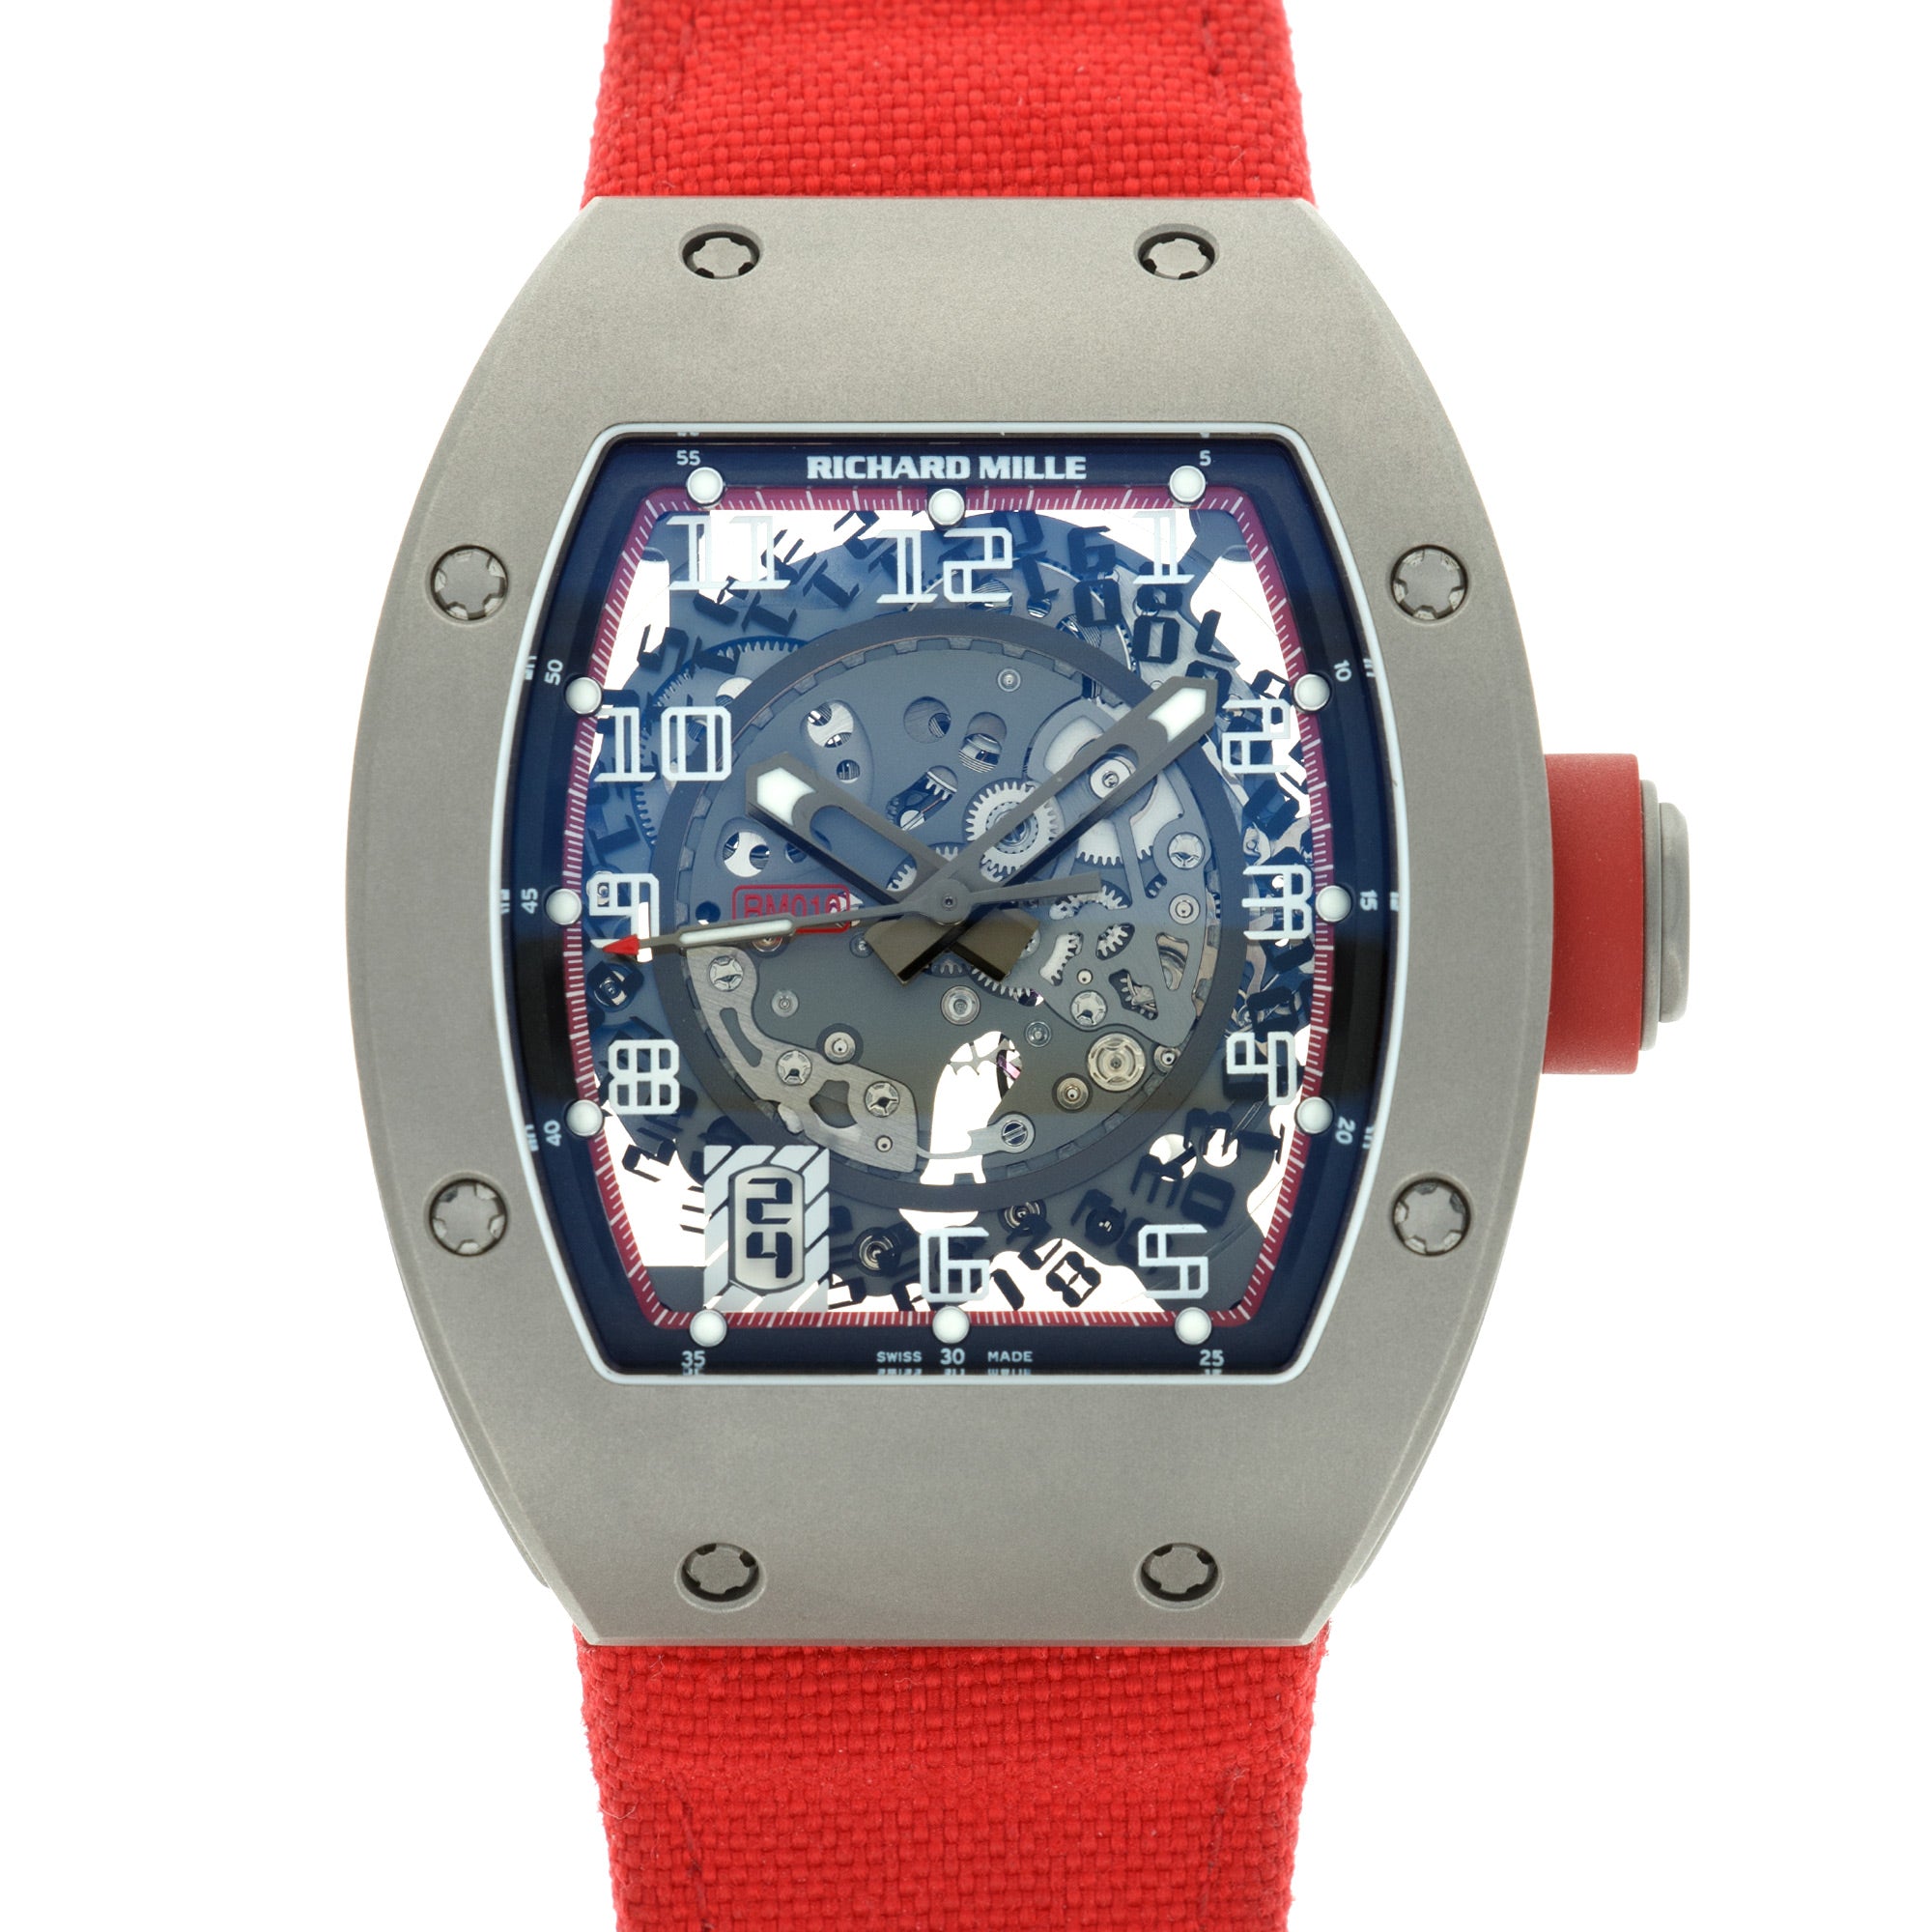 Richard Mille - Richard Mille RM010 Titanium, Limited Ginza Collection of 15 - The Keystone Watches